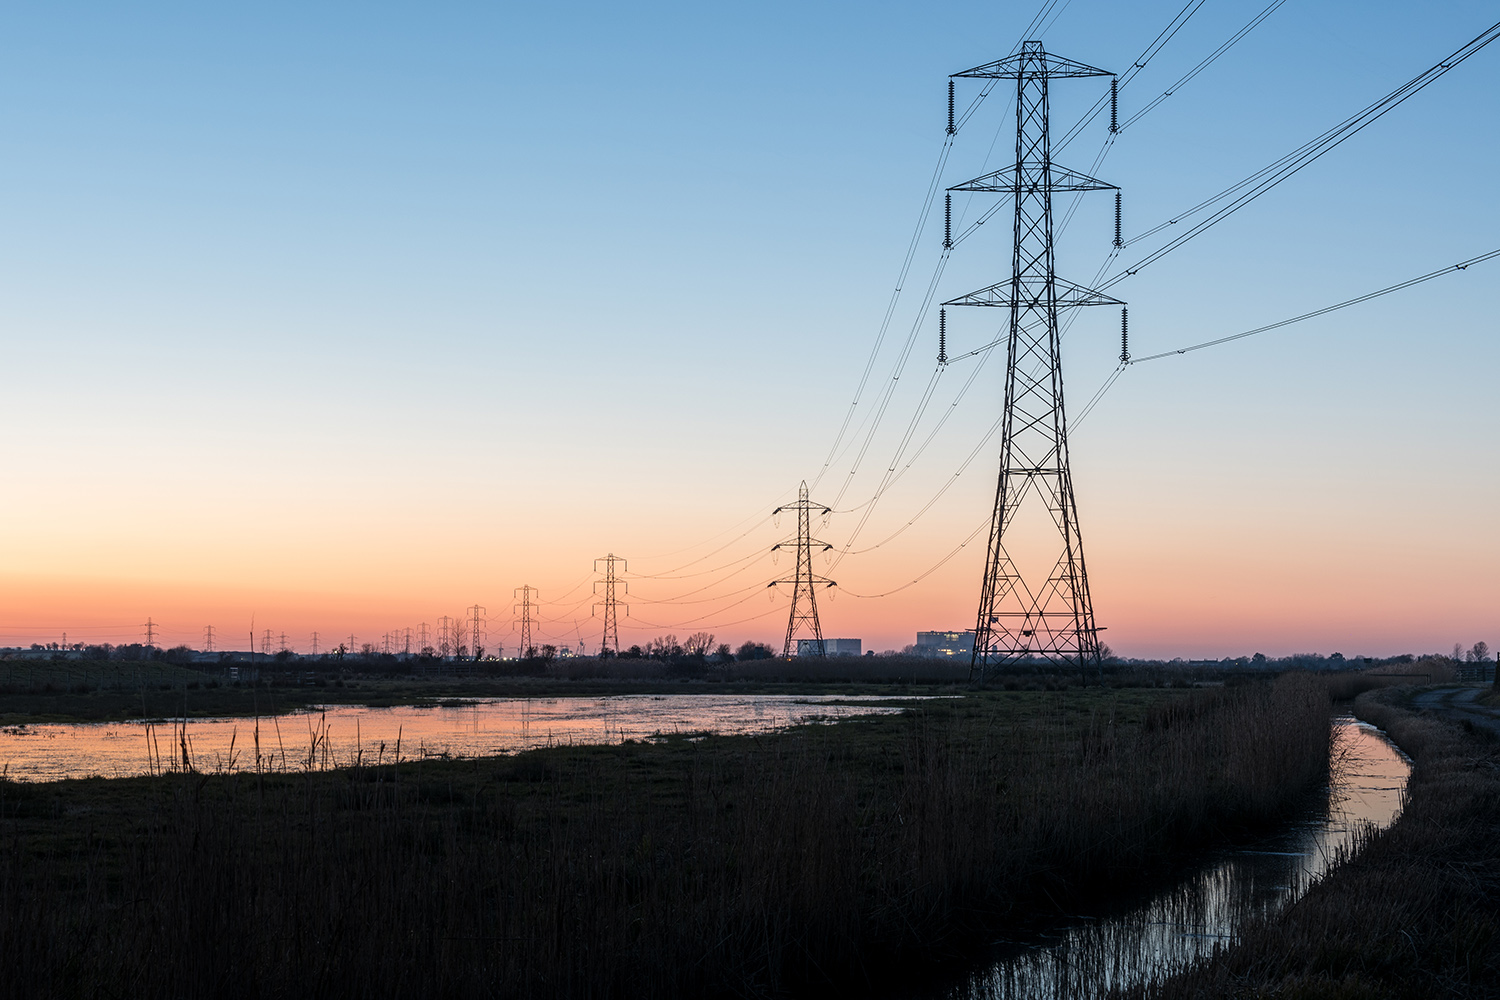 Environment - America's Electric Cooperatives